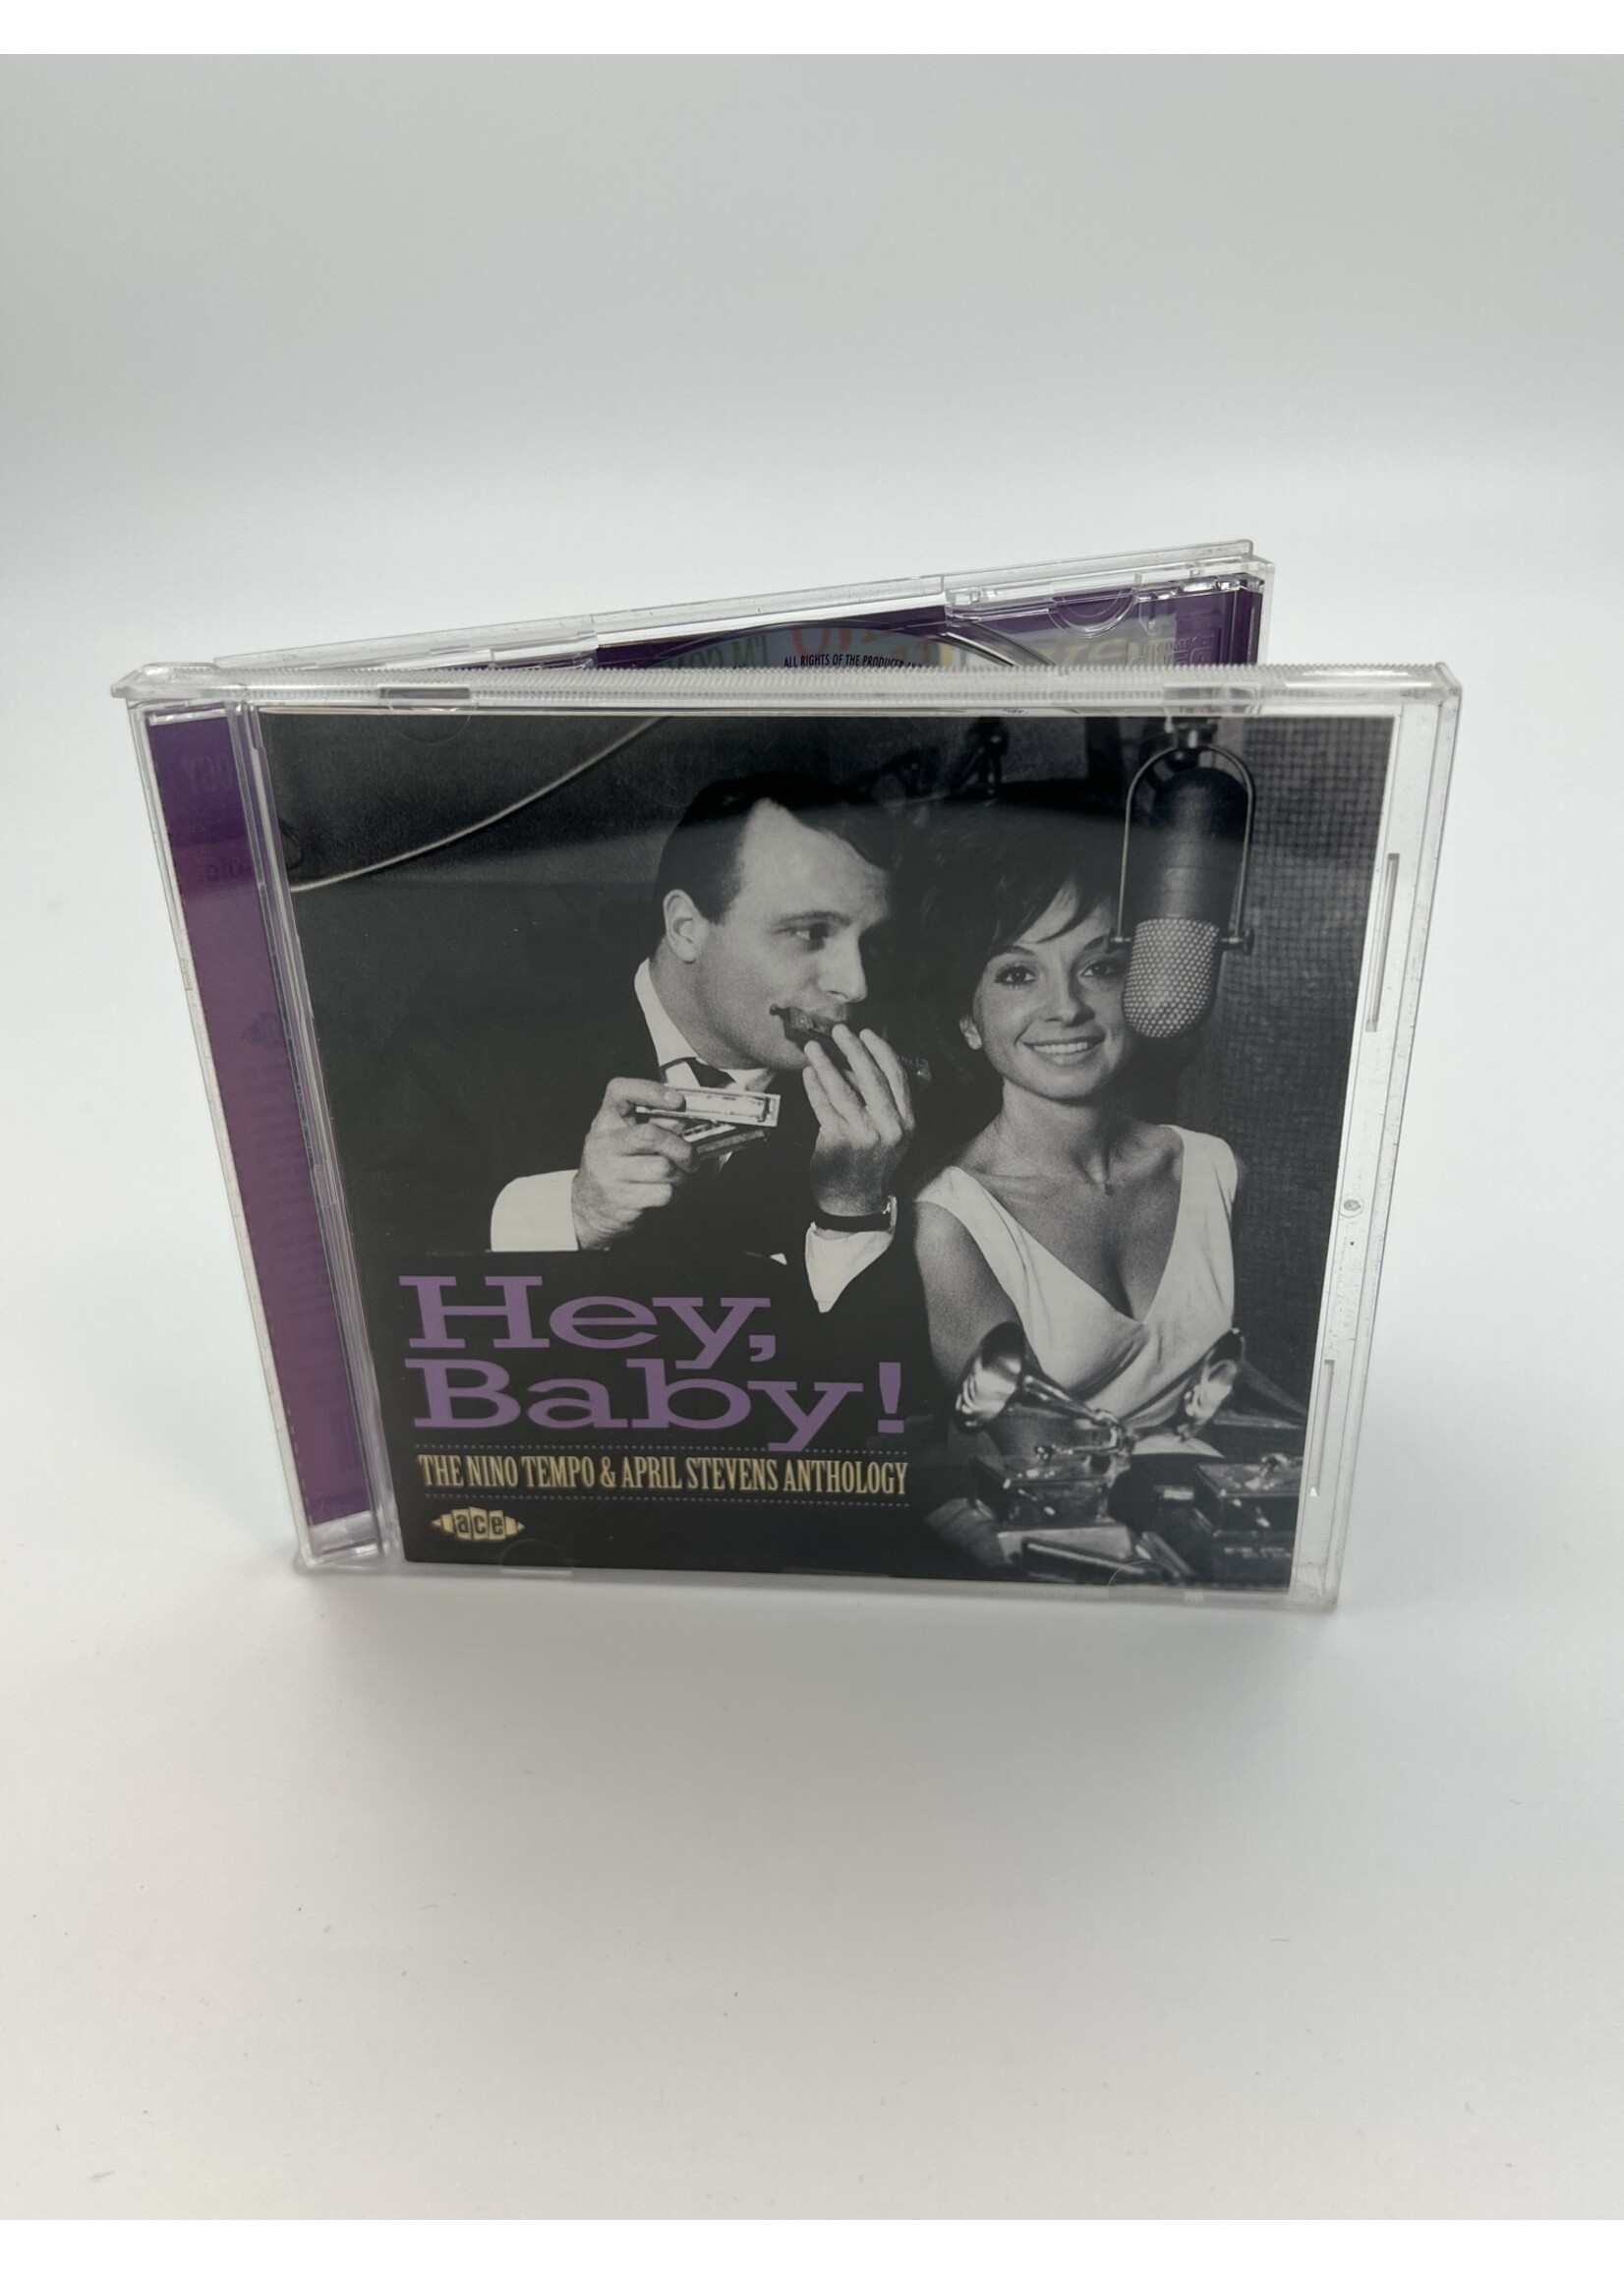 CD Hey Baby The Nino Tempo And April Stevens Anthology CD